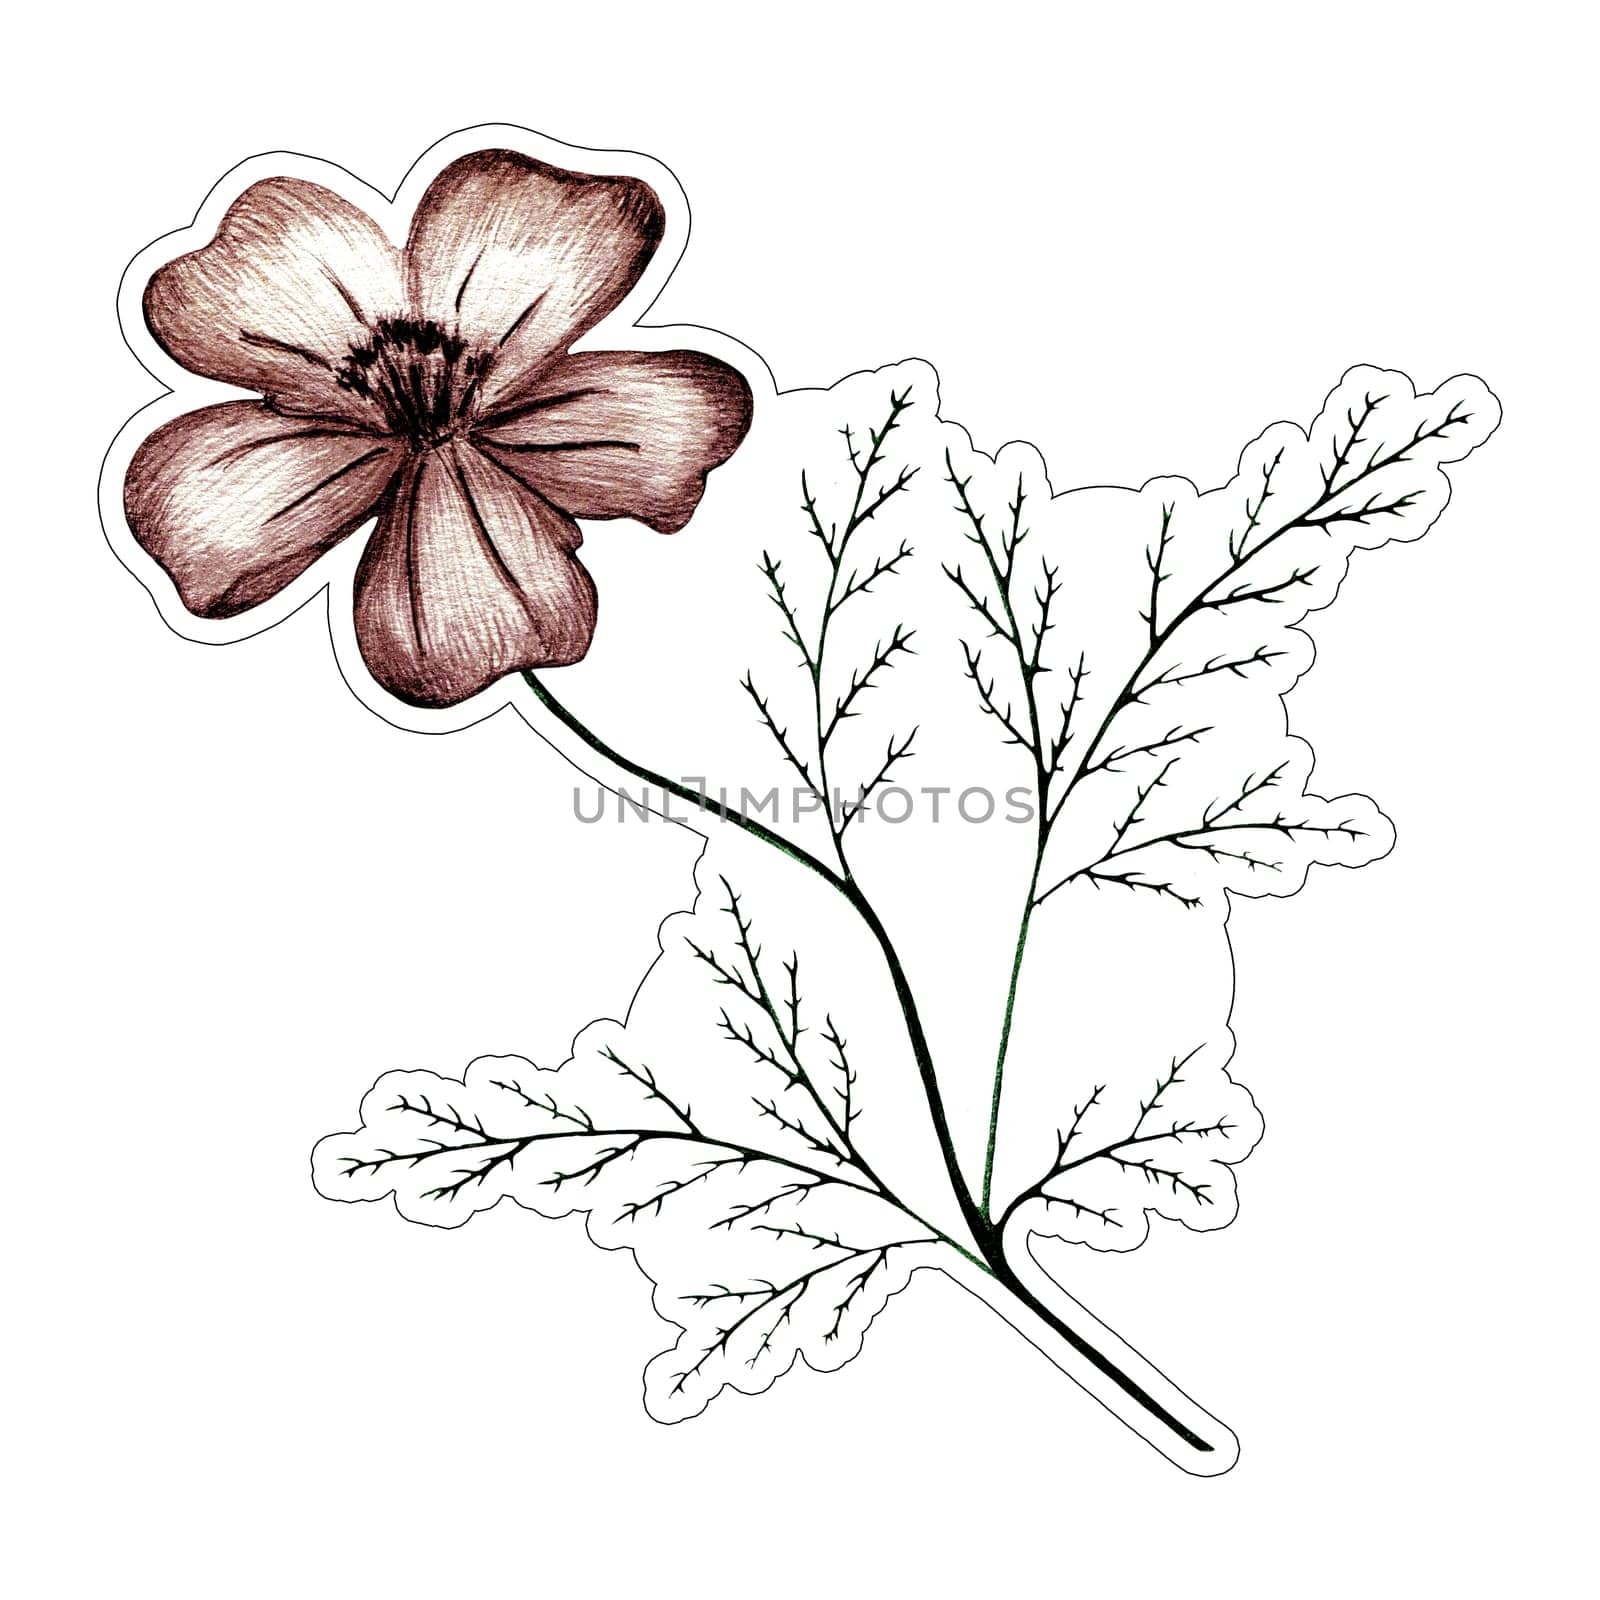 Marigold Flower with Leaves Sticker Illustration. Hand Drawn Isolated Colorful Floral Sticker.